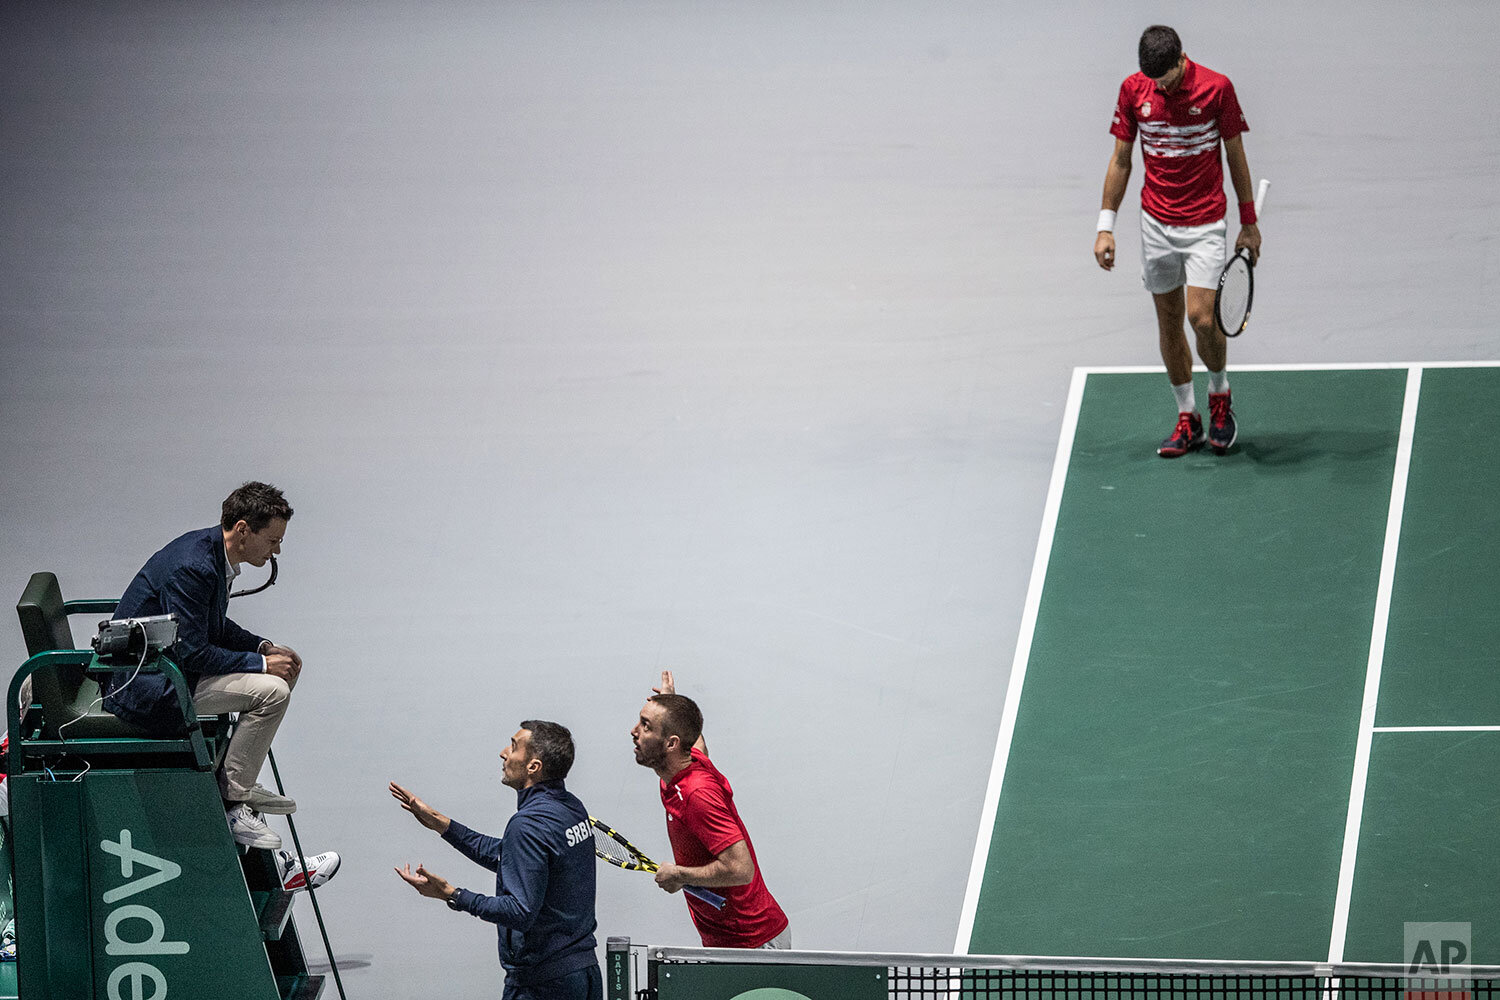  Serbia's captain Nenad Zimonjic and teammate Viktor Troicki, center, argue with the referee during the Davis Cup quarterfinal doubles match against  Russia¥s Karen Khachanov and Andrey Rublev in Madrid, Spain, Friday, Nov. 22, 2019. (AP Photo/Bernat